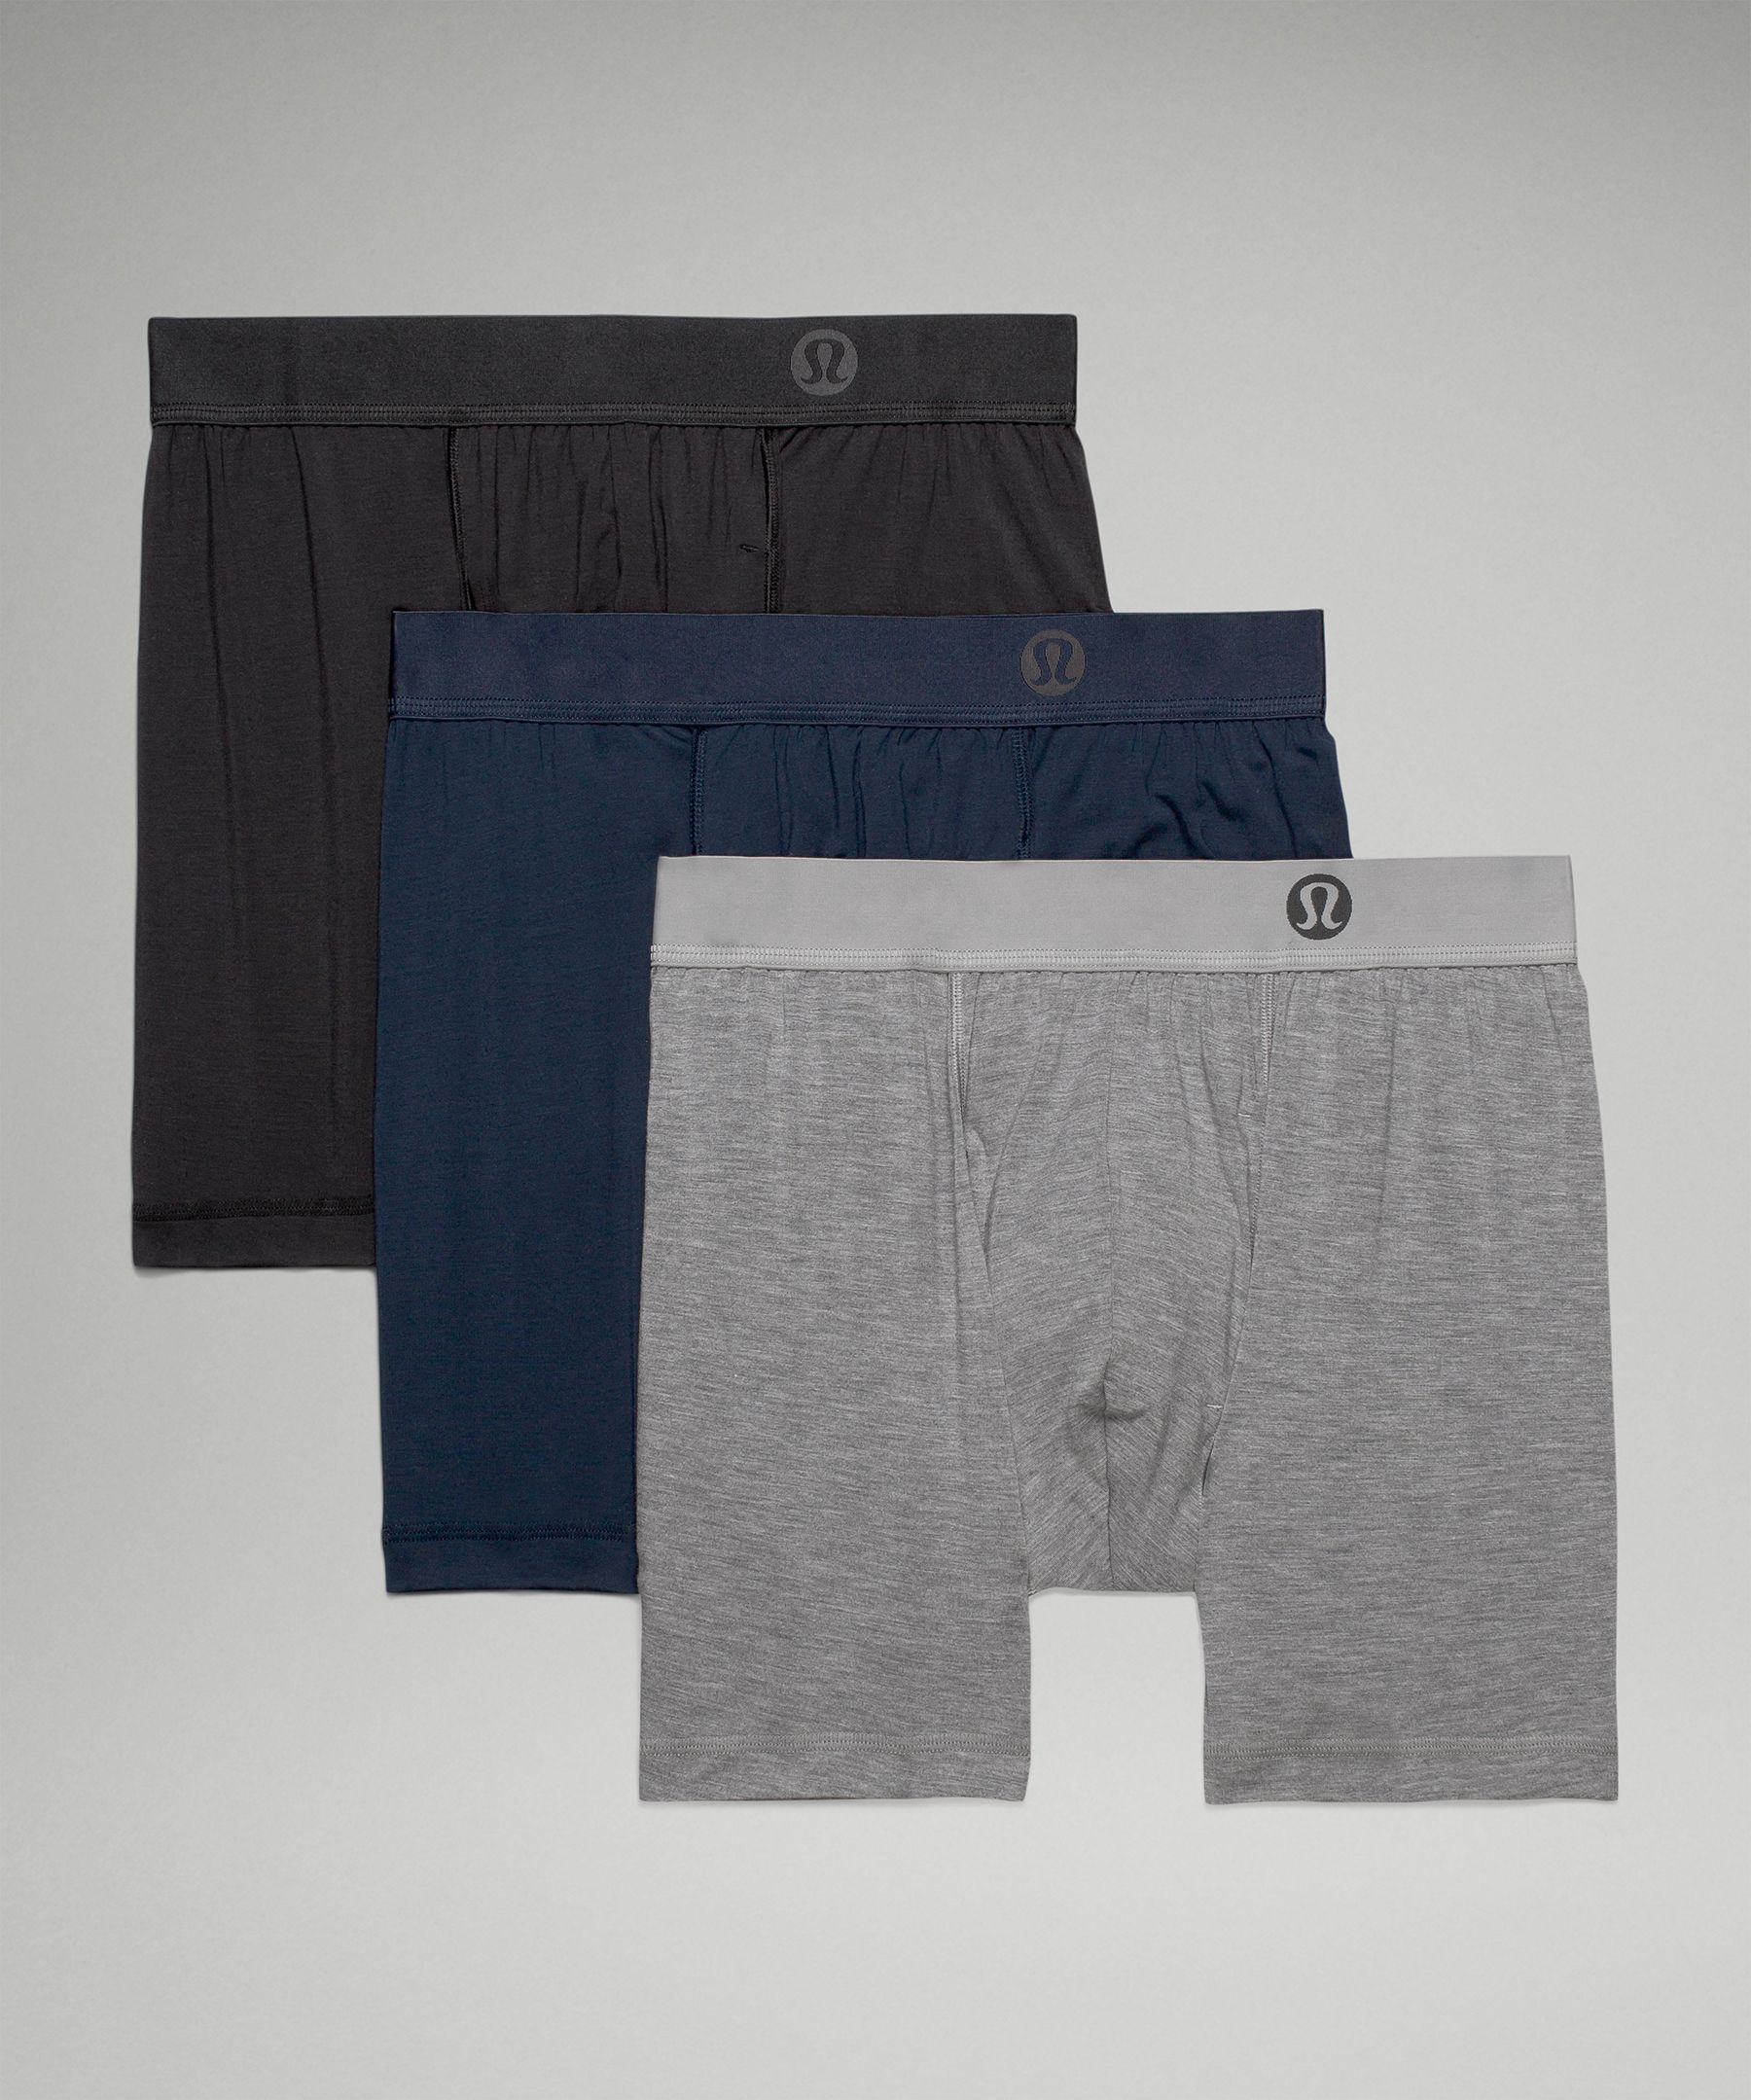 Lululemon Always In Motion Boxer with Fly 3 Pack